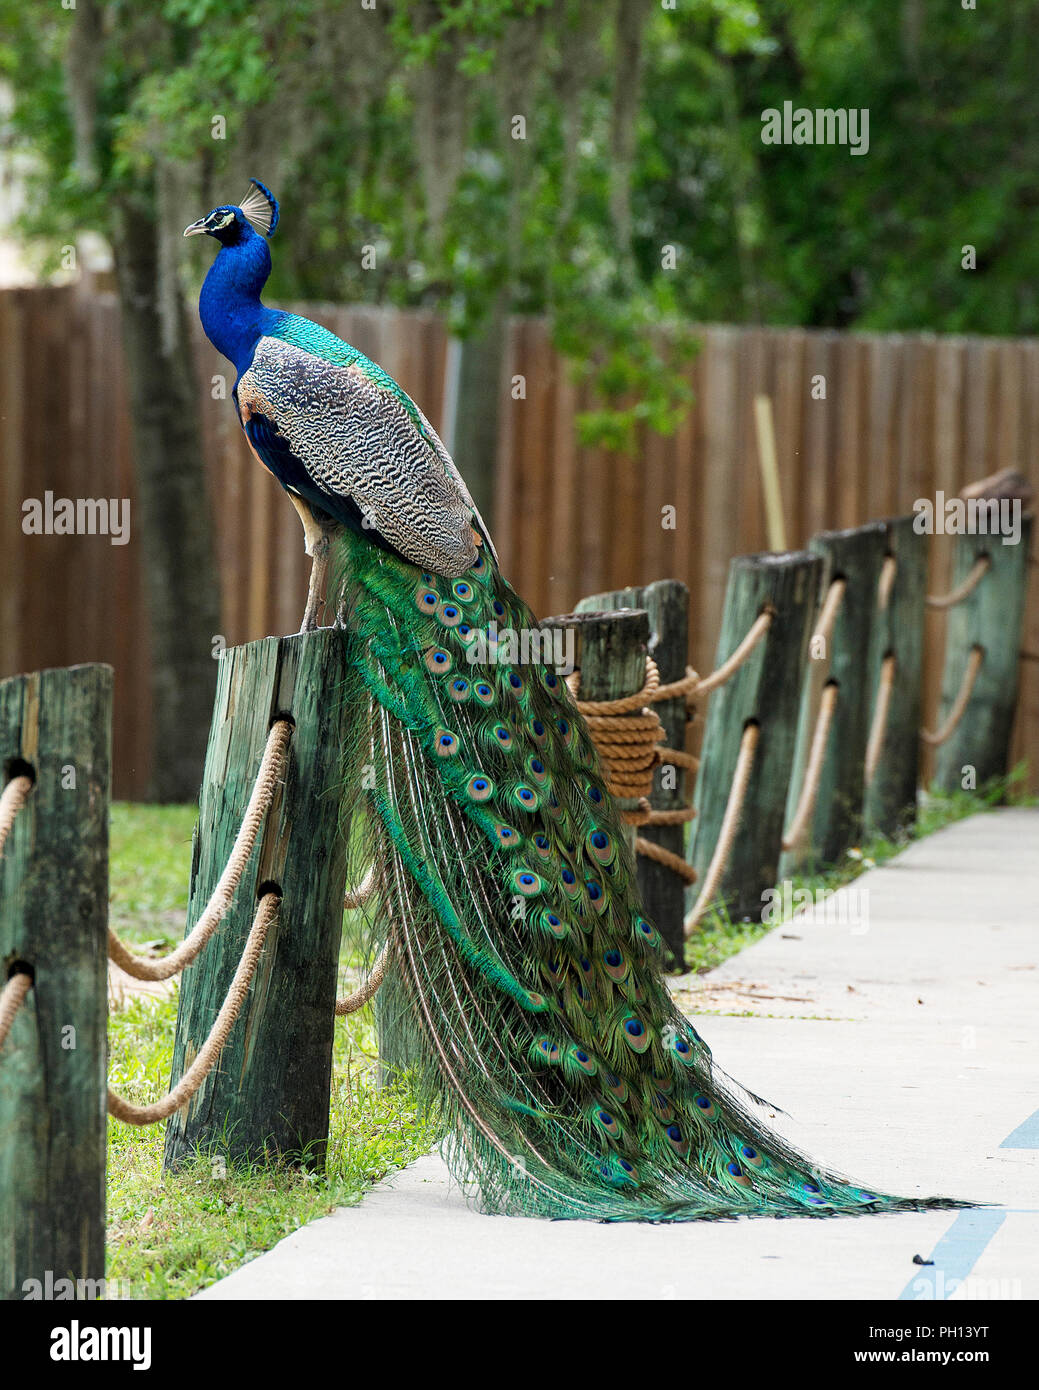 Peacock bird displaying its beautiful and colorful blue & green plumage tail with eyespots. Stock Photo